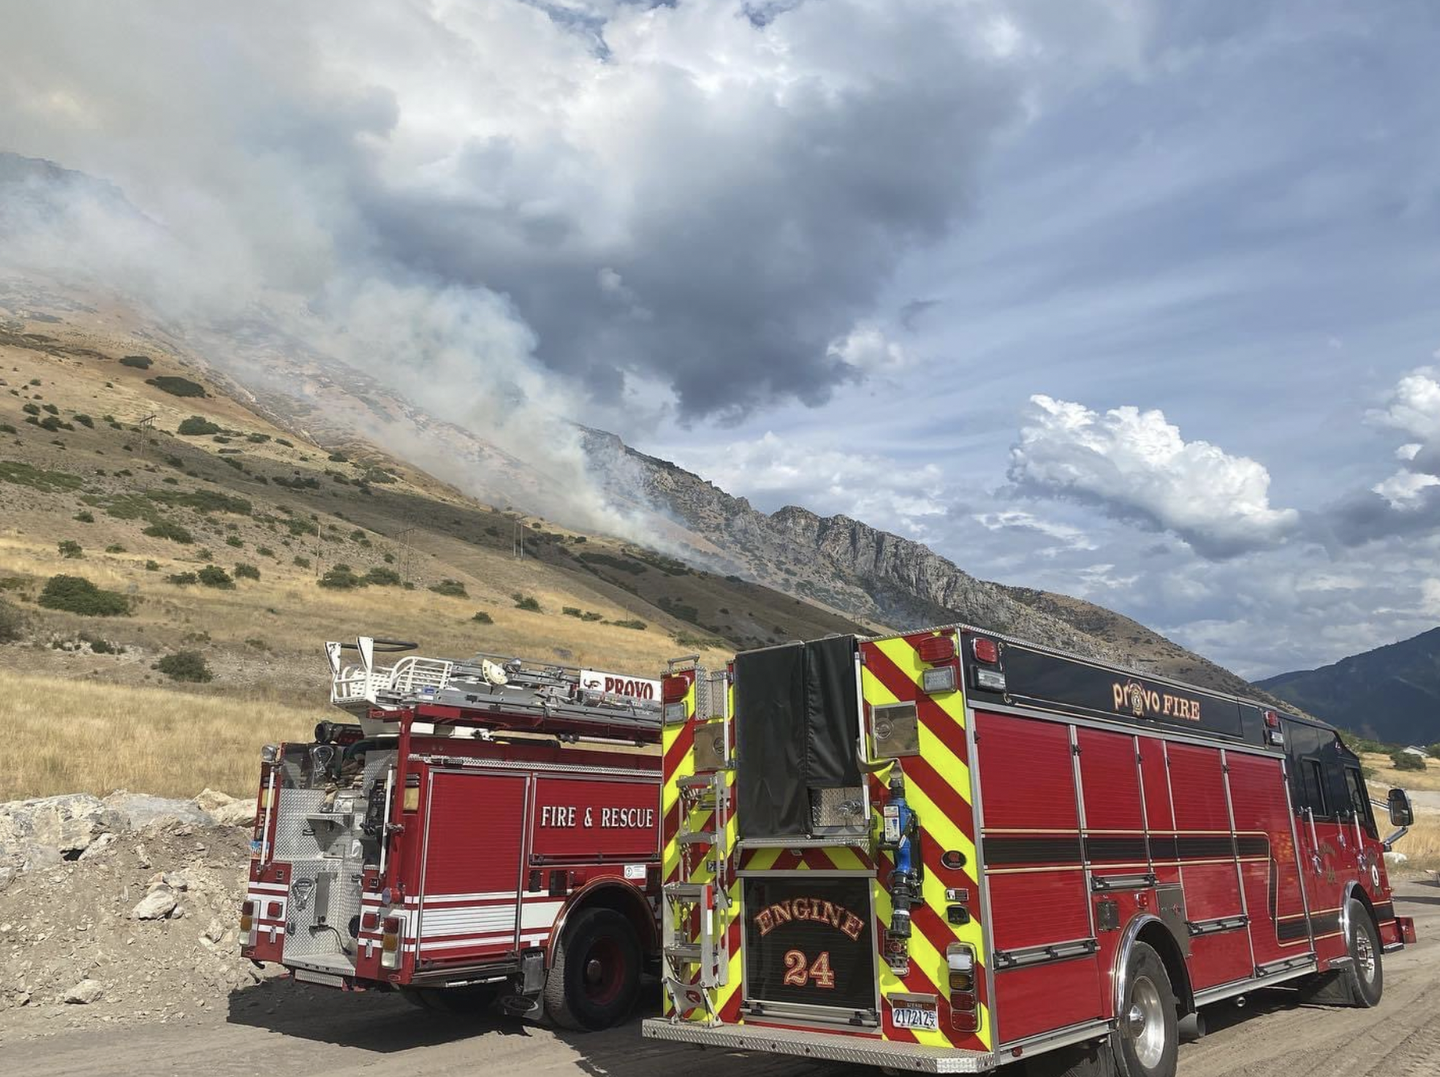 Utah Man Allegedly Starts a Wildfire While Attempting to Kill a Spider